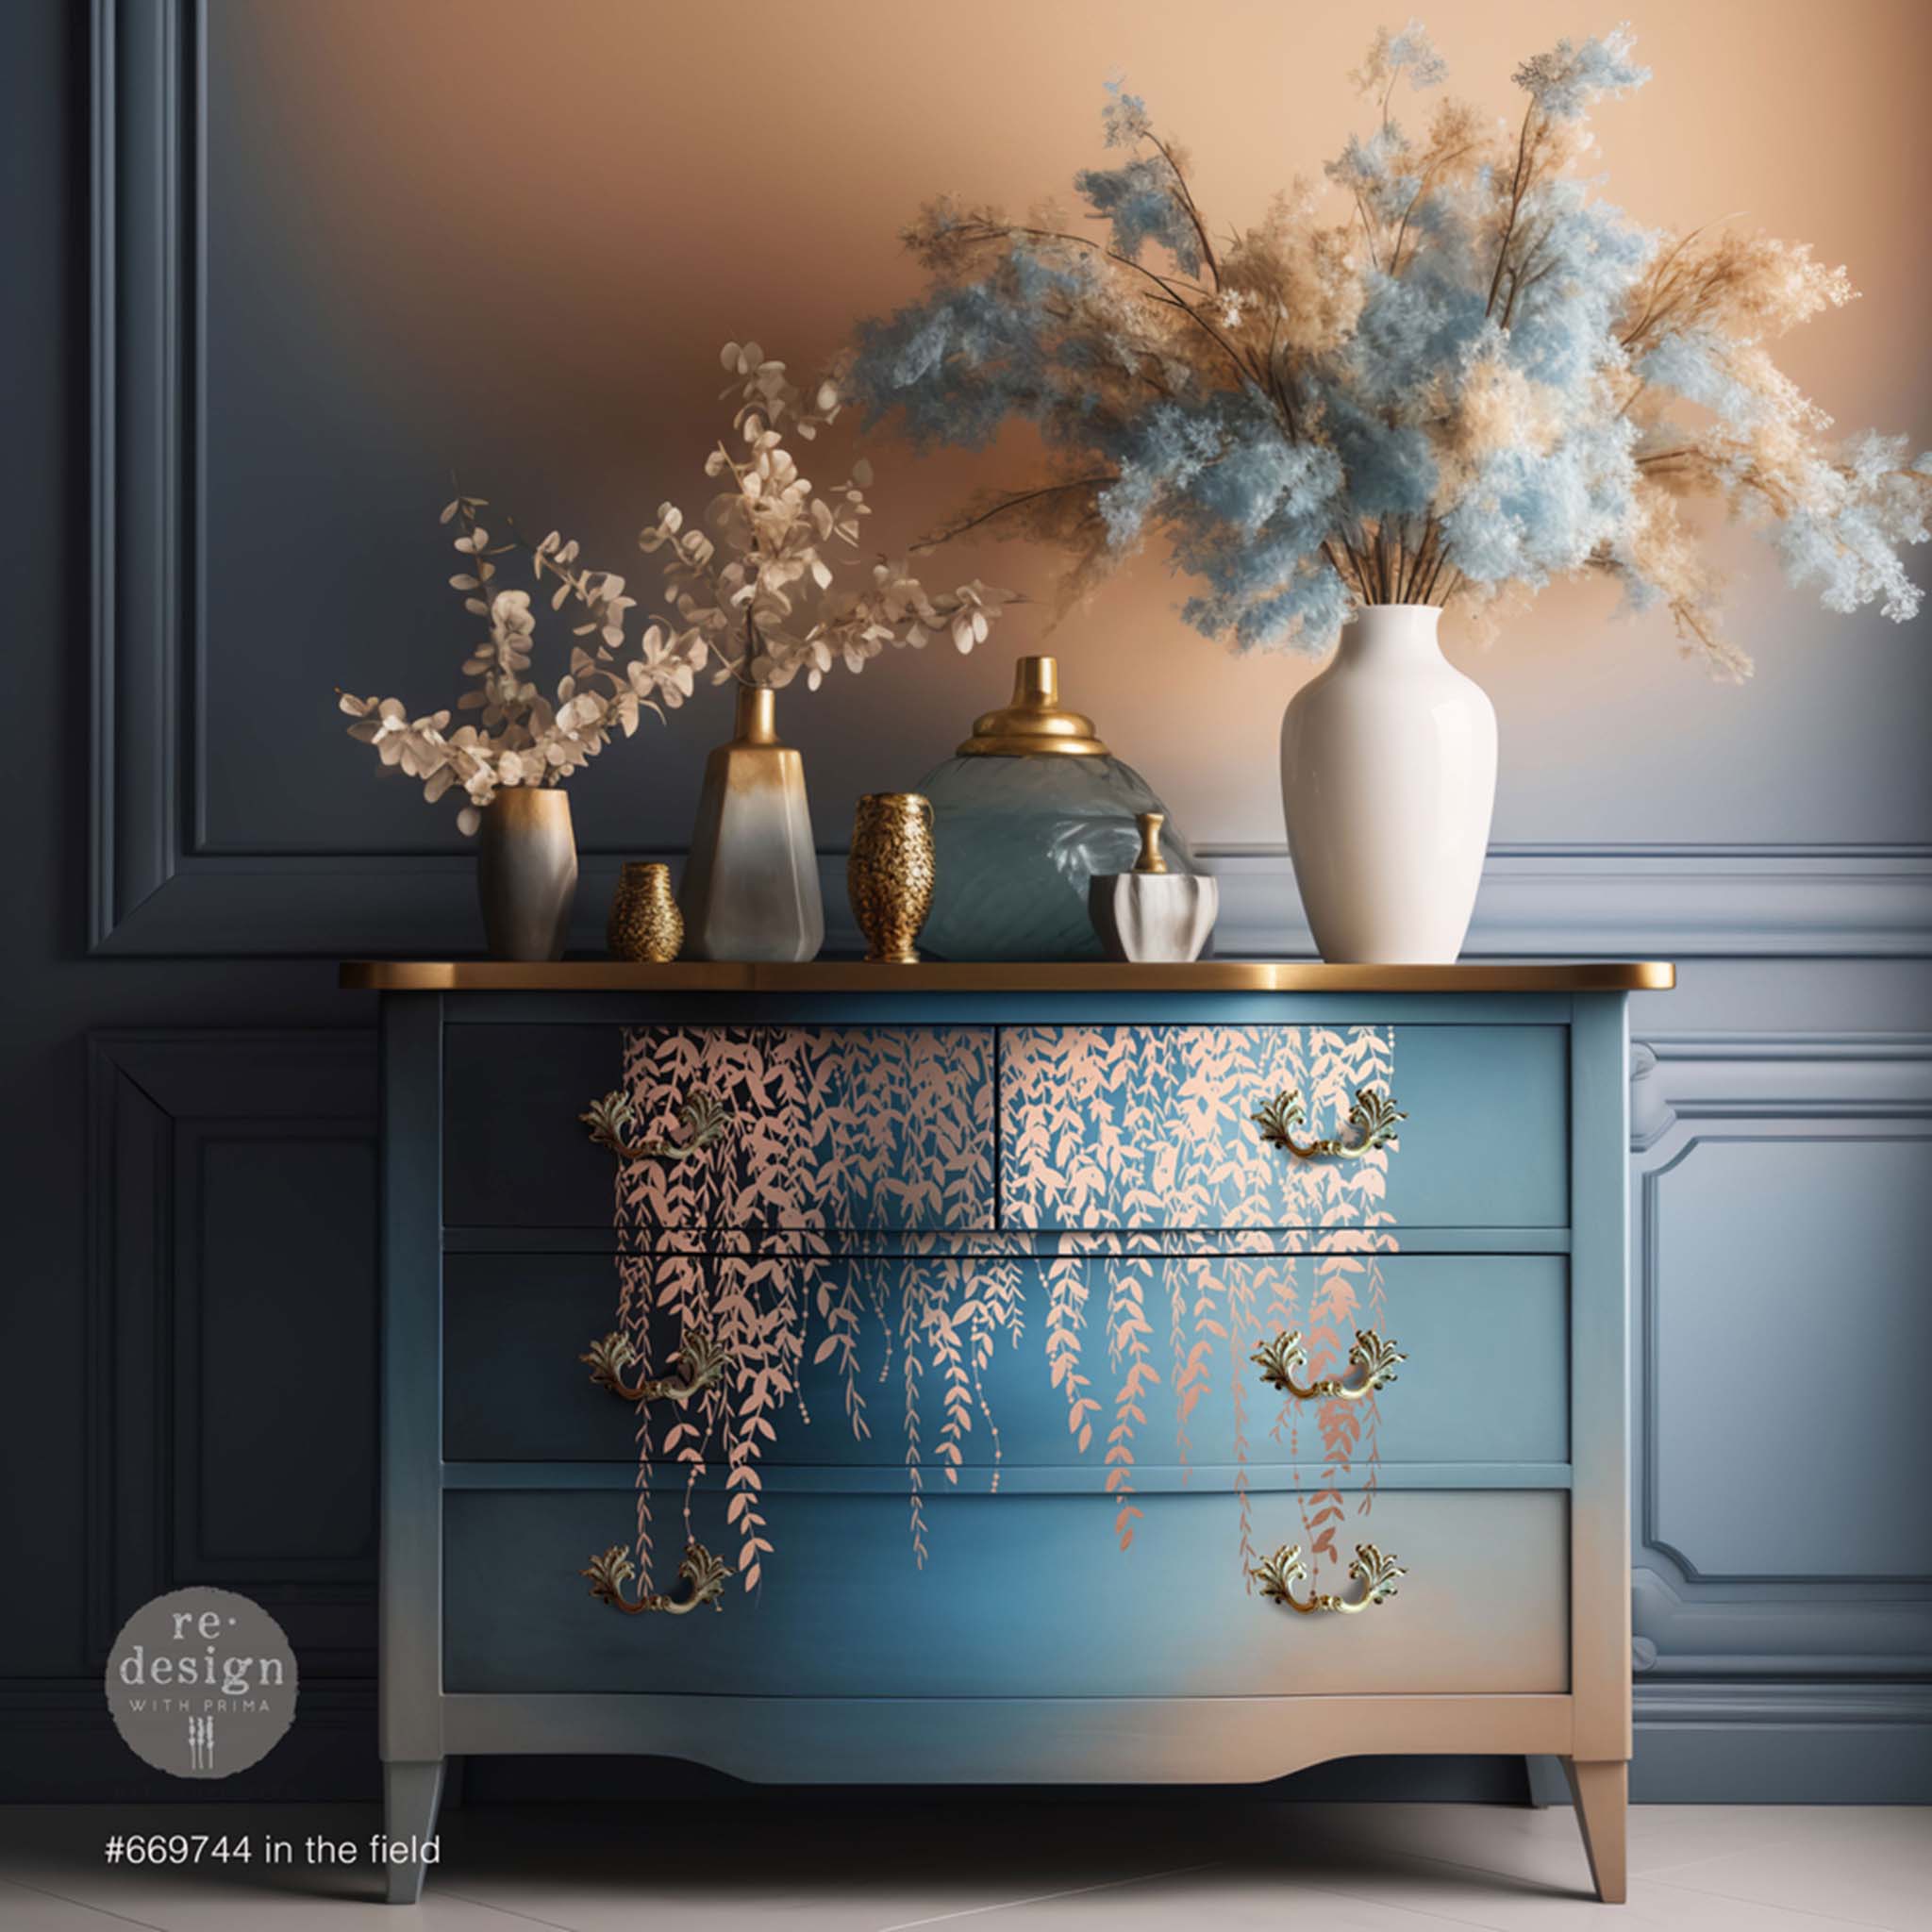 A 4-drawer dresser is painted an ombre of blue down to rose gold and features ReDesign with Prima's Kacha In the Field rose gold foil transfer vining down the center of the drawers.